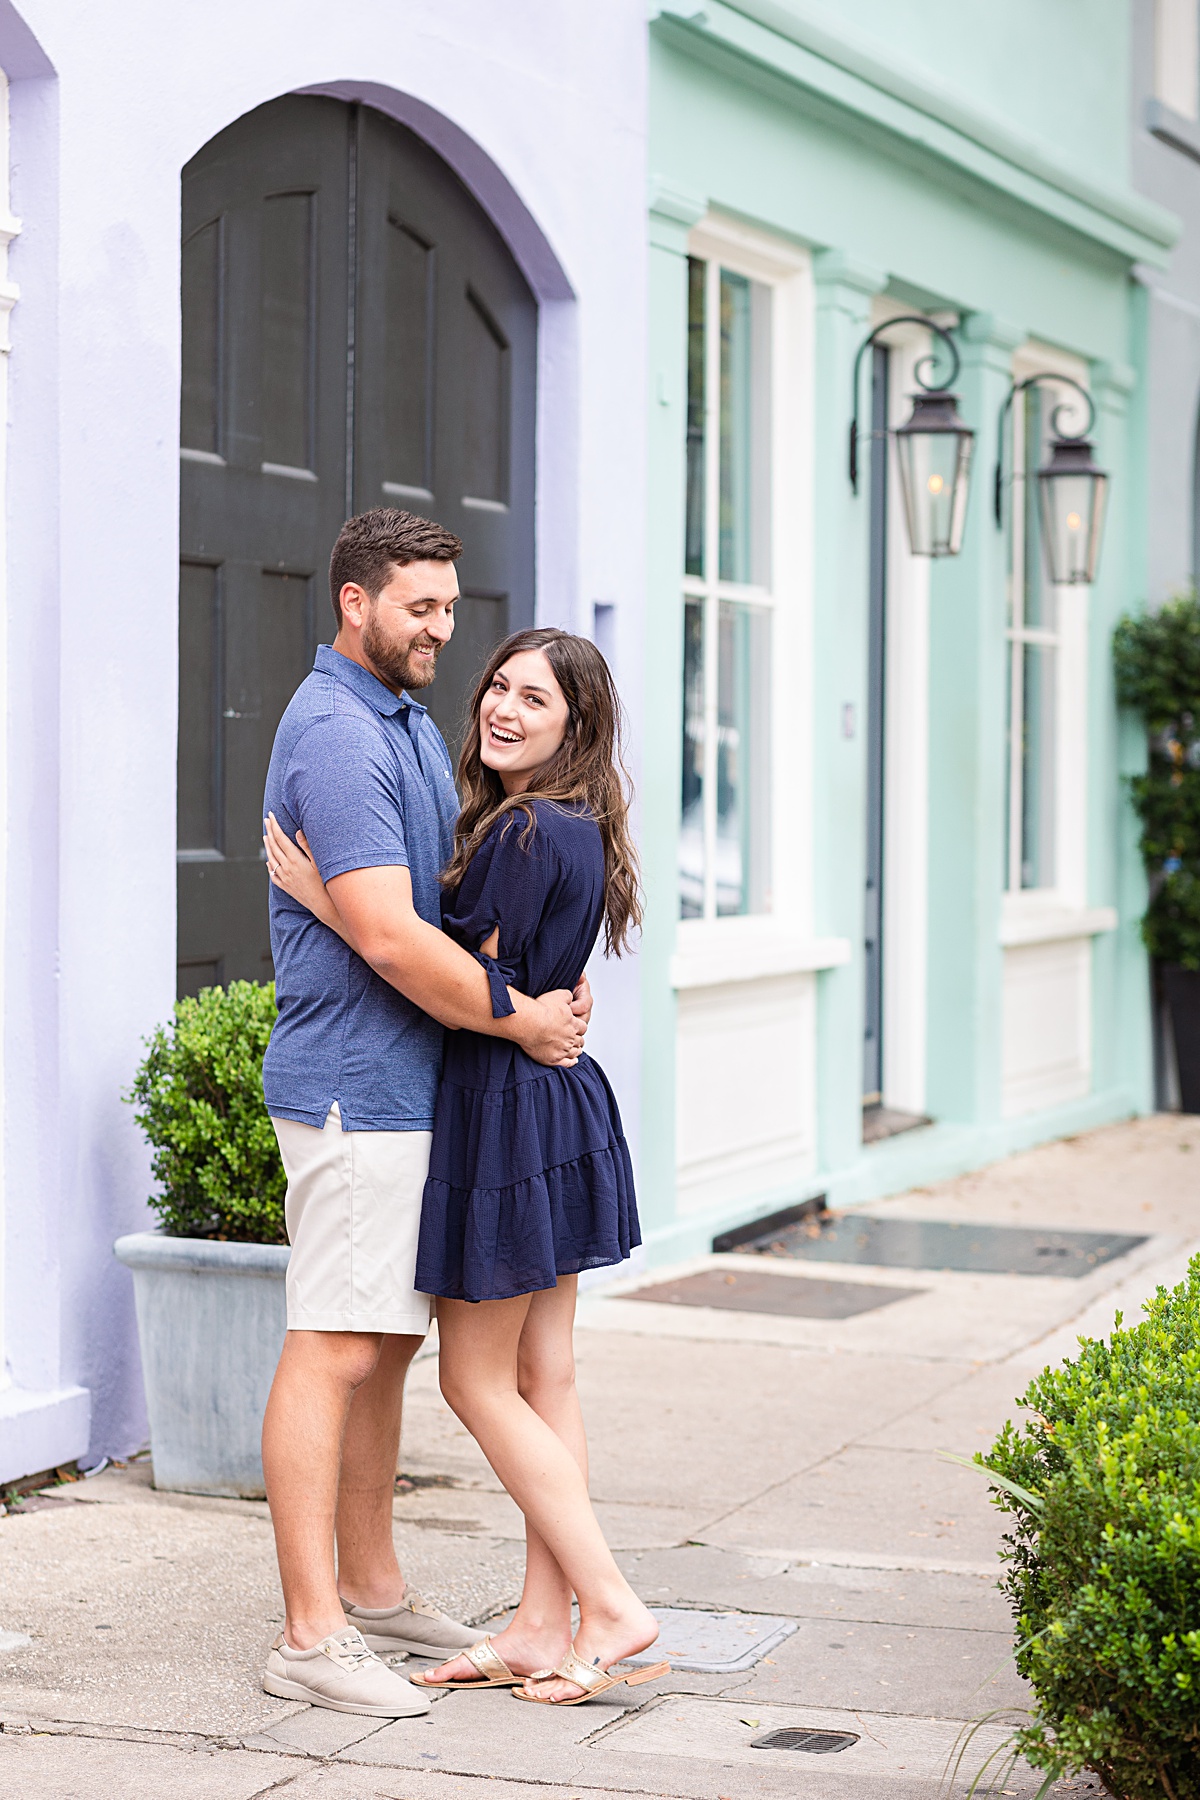 This Magnolia Plantation engagement session was in the early spring time to have those beautiful spring blooms! These two got engaged at Magnolia Plantation and wanted their engagement session there as well so we traveled down south to Charleston!